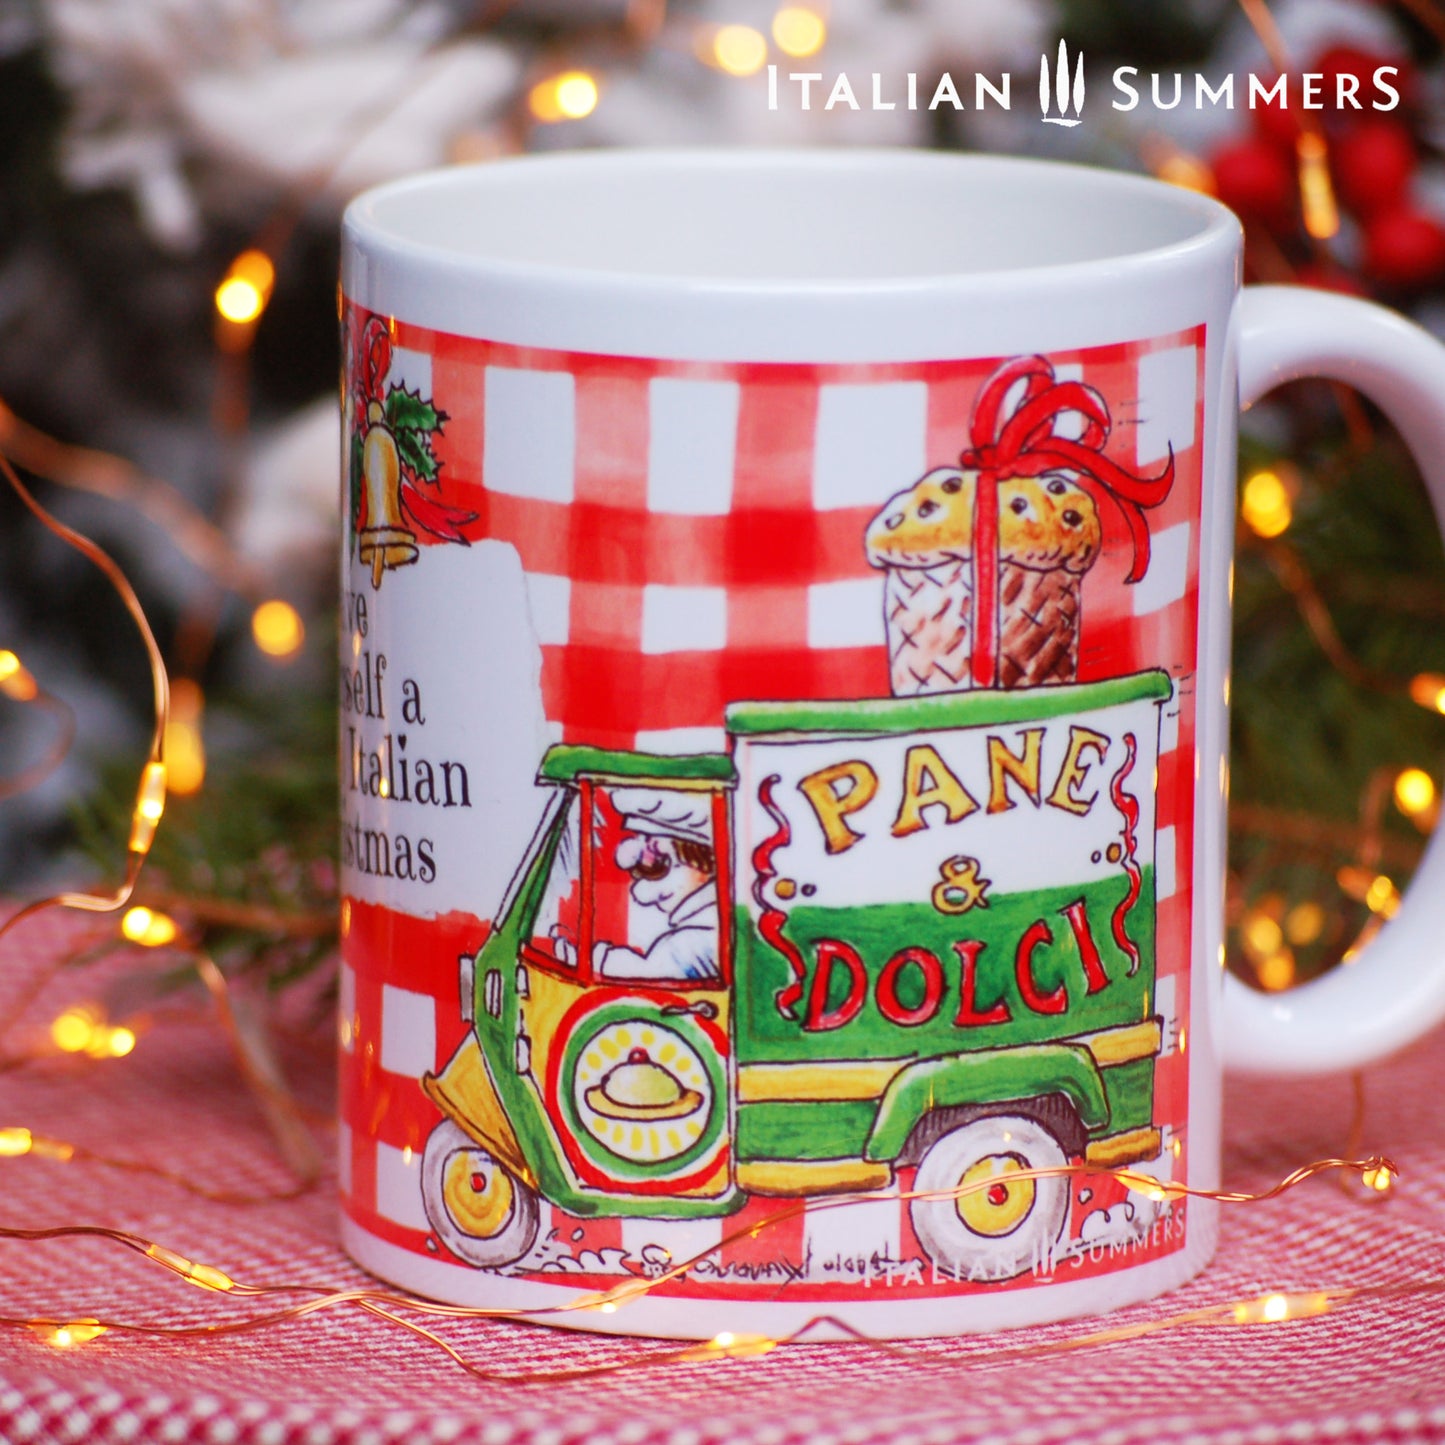 Italy Chirstmas mug Pane e Dolci with a sketch of the local Italian baker, driving his funny car with the text PANE & DOLCE, and on the top he has the biggest panettone. Ther are italian dolce on the mug and the text "have yourself a Dolce Italian Christmas" made by Italian  Summers